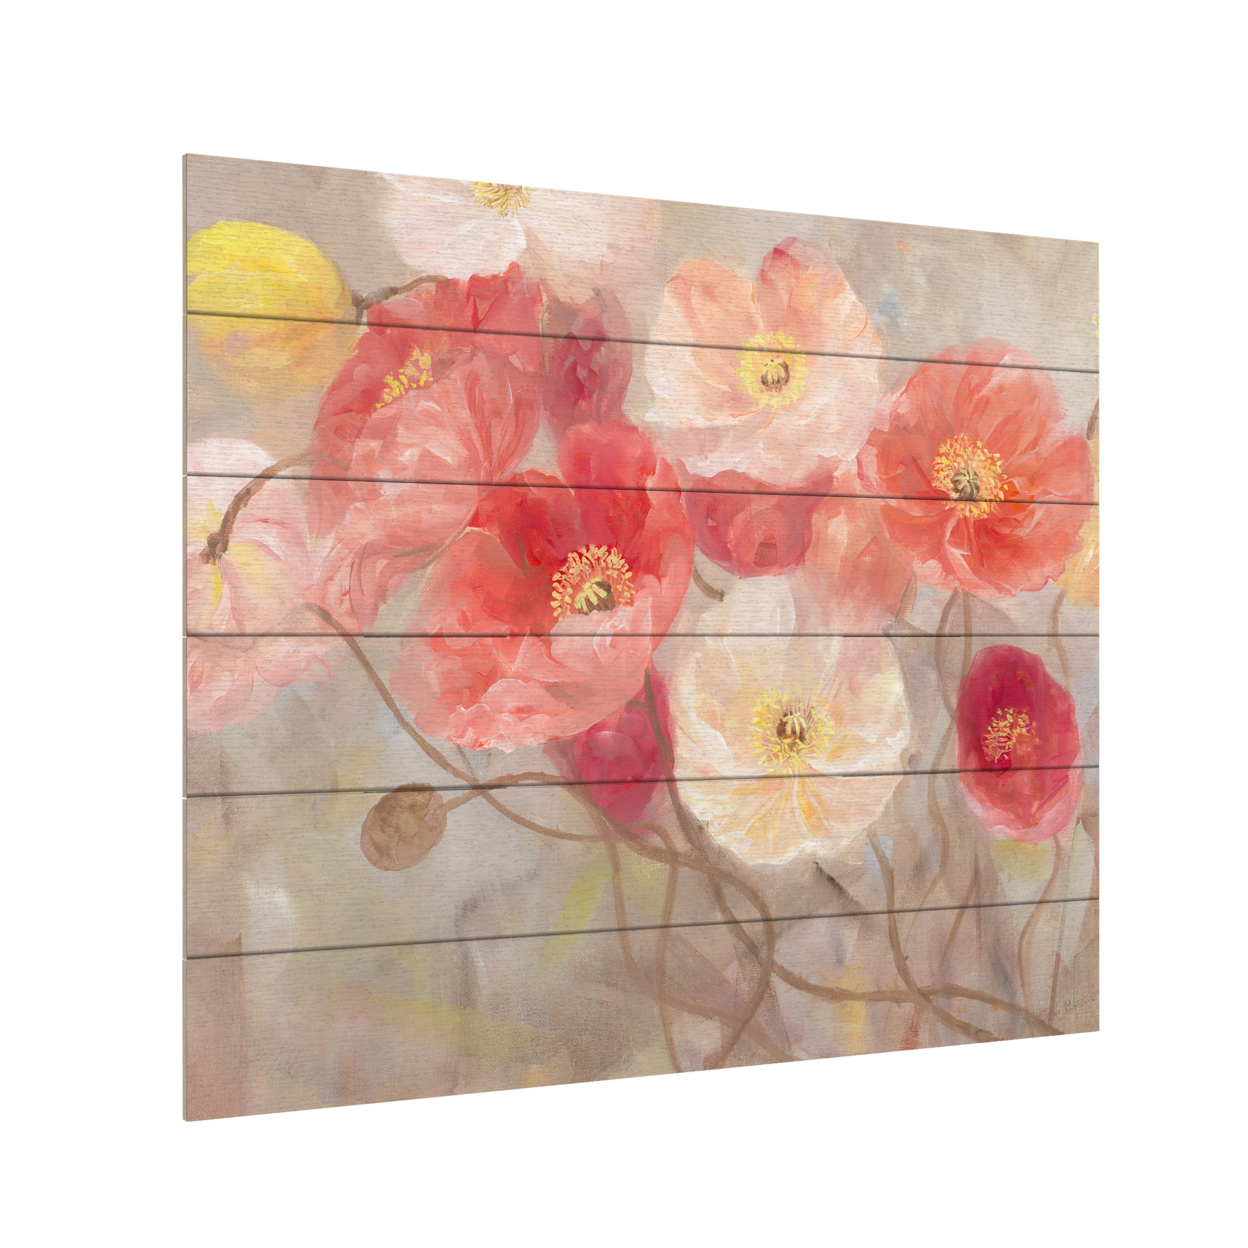 Wooden Slat Art 18 X 22 Inches Titled Wild Poppies I Ready To Hang Home Decor Picture